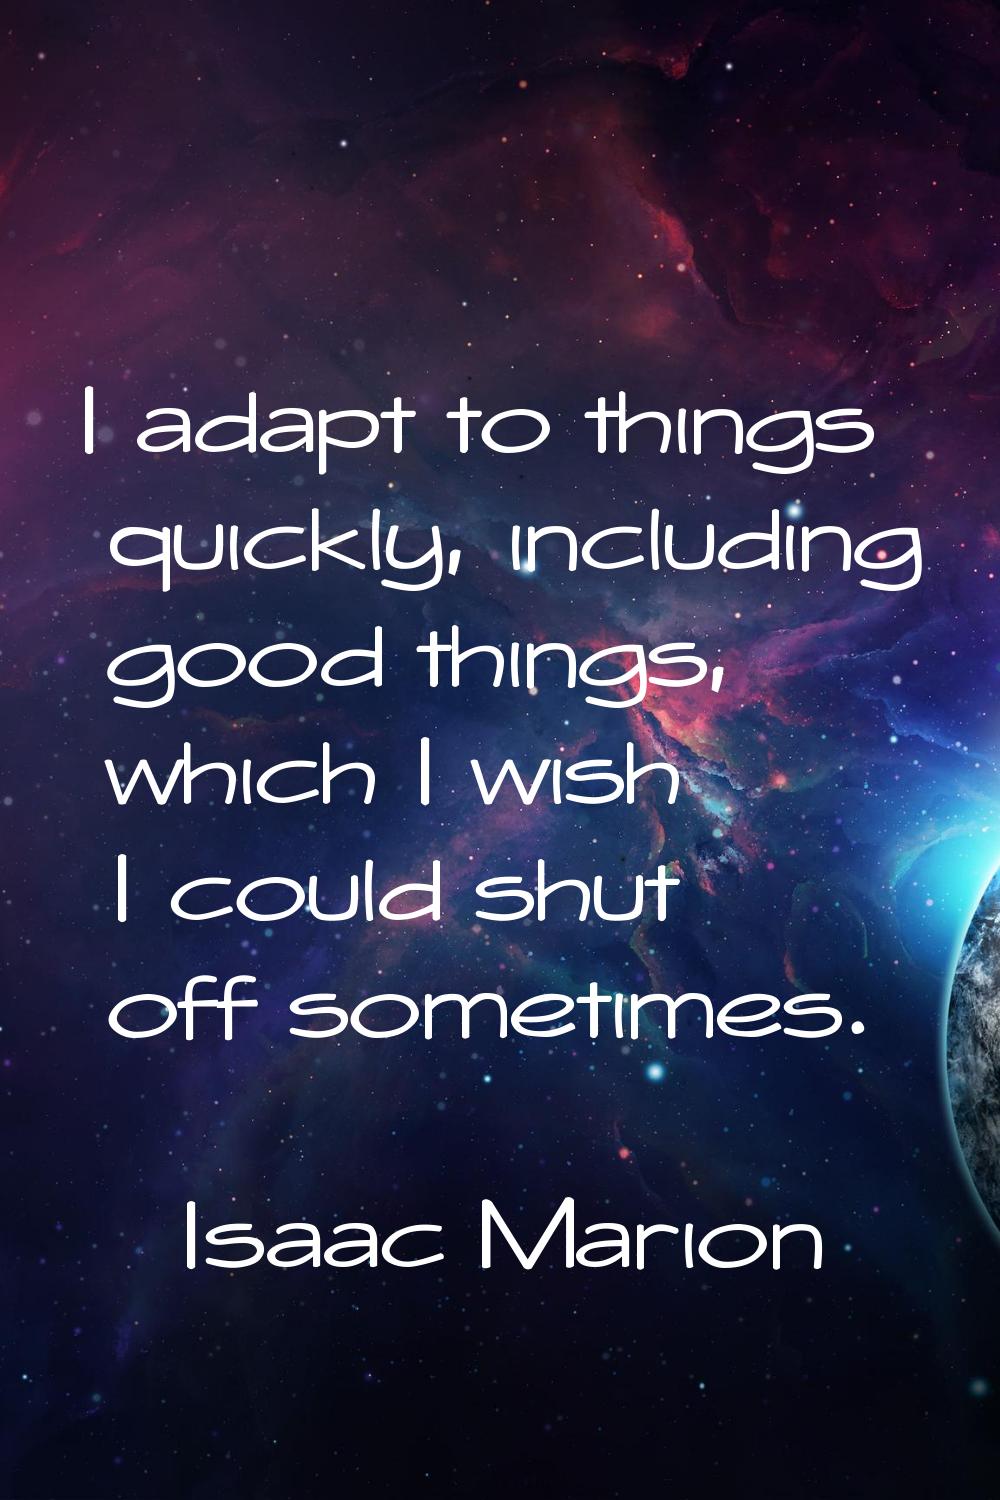 I adapt to things quickly, including good things, which I wish I could shut off sometimes.